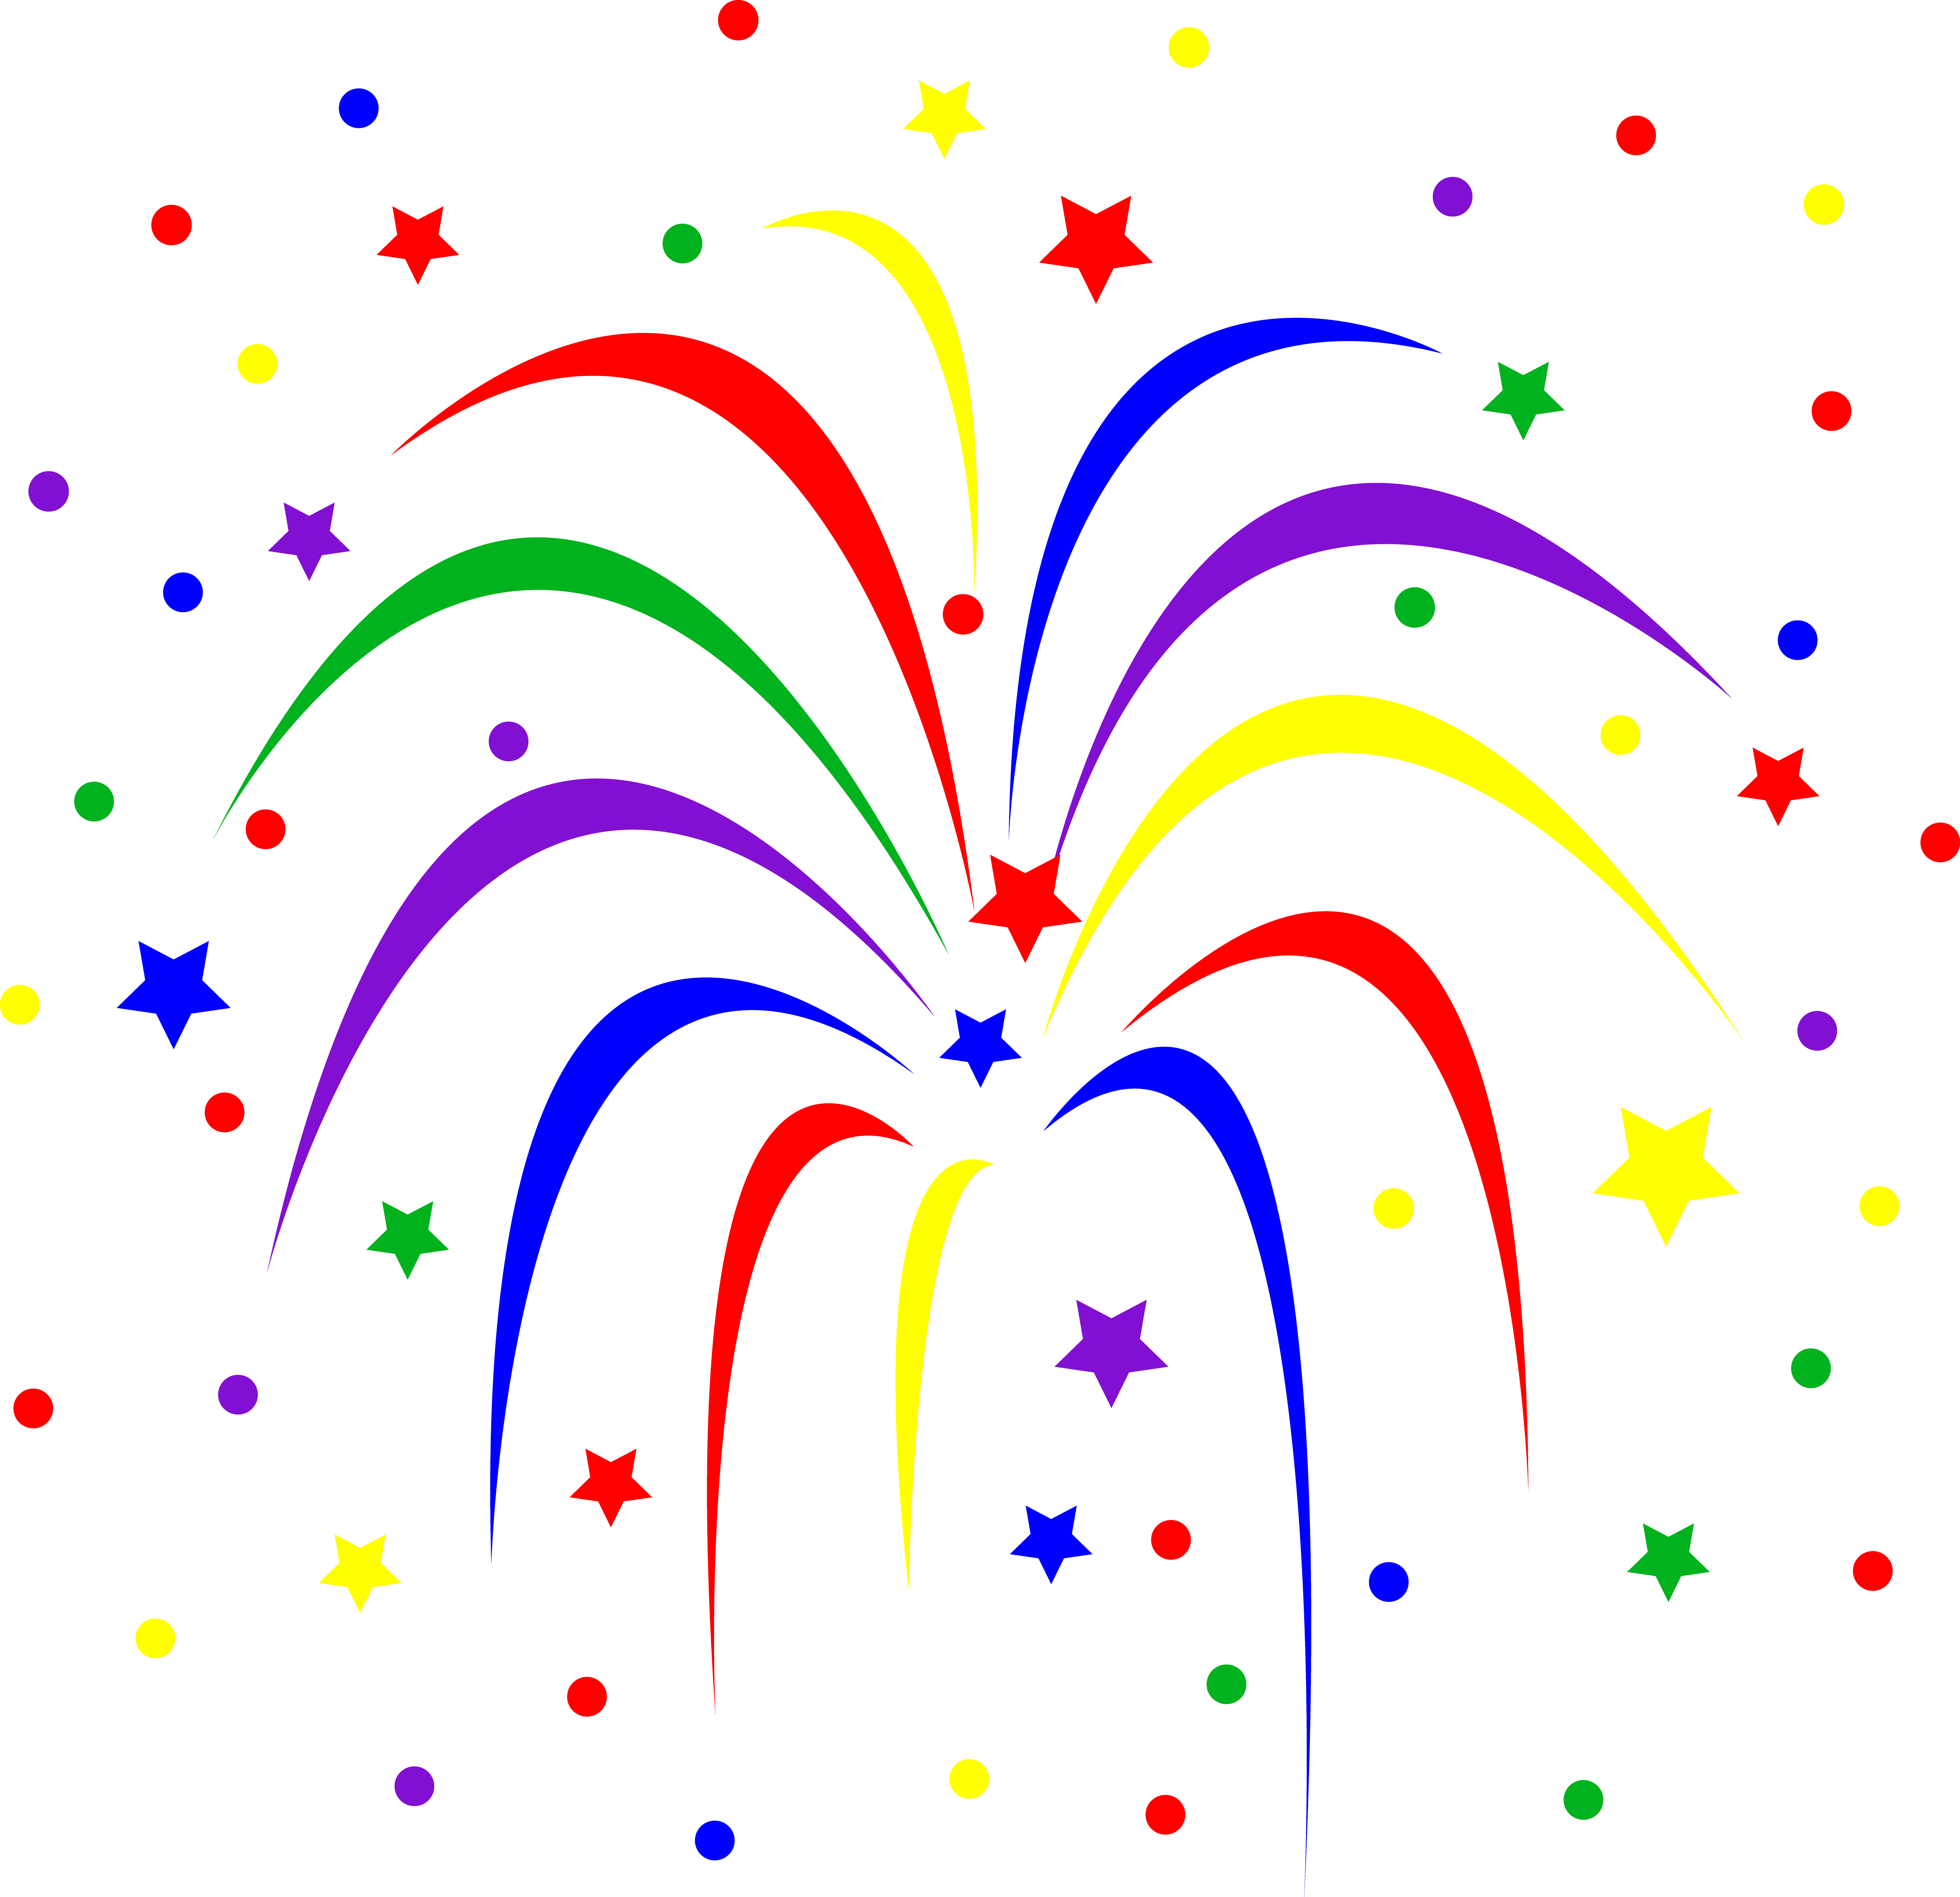 Cartoon Images Of Fireworks - ClipArt Best